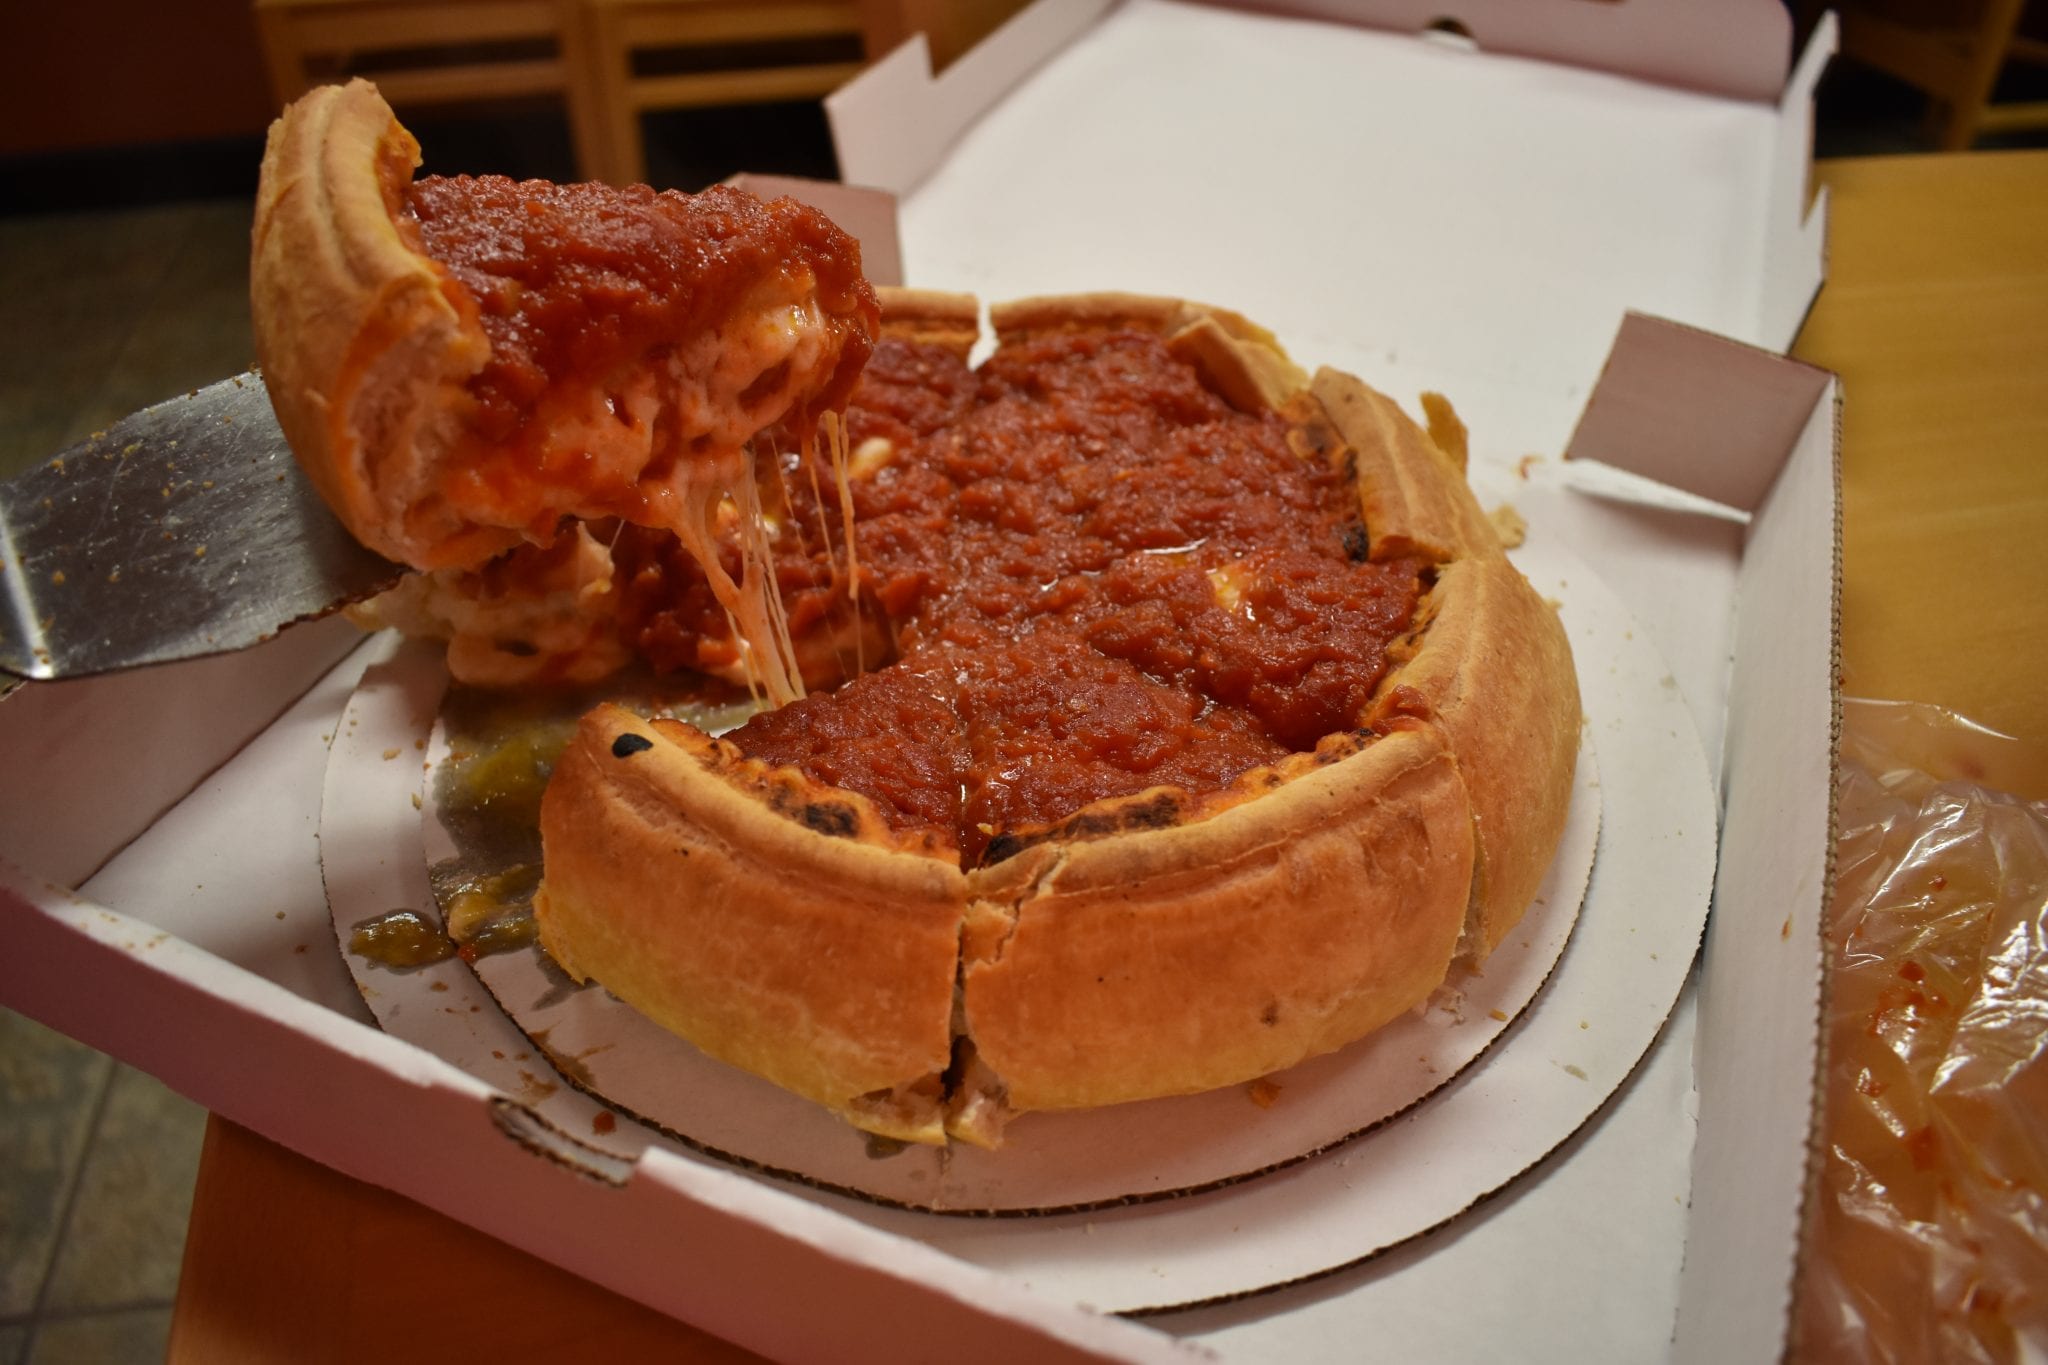 Deep Dish Pizza vs Stuffed Pizza - Here are the Differences